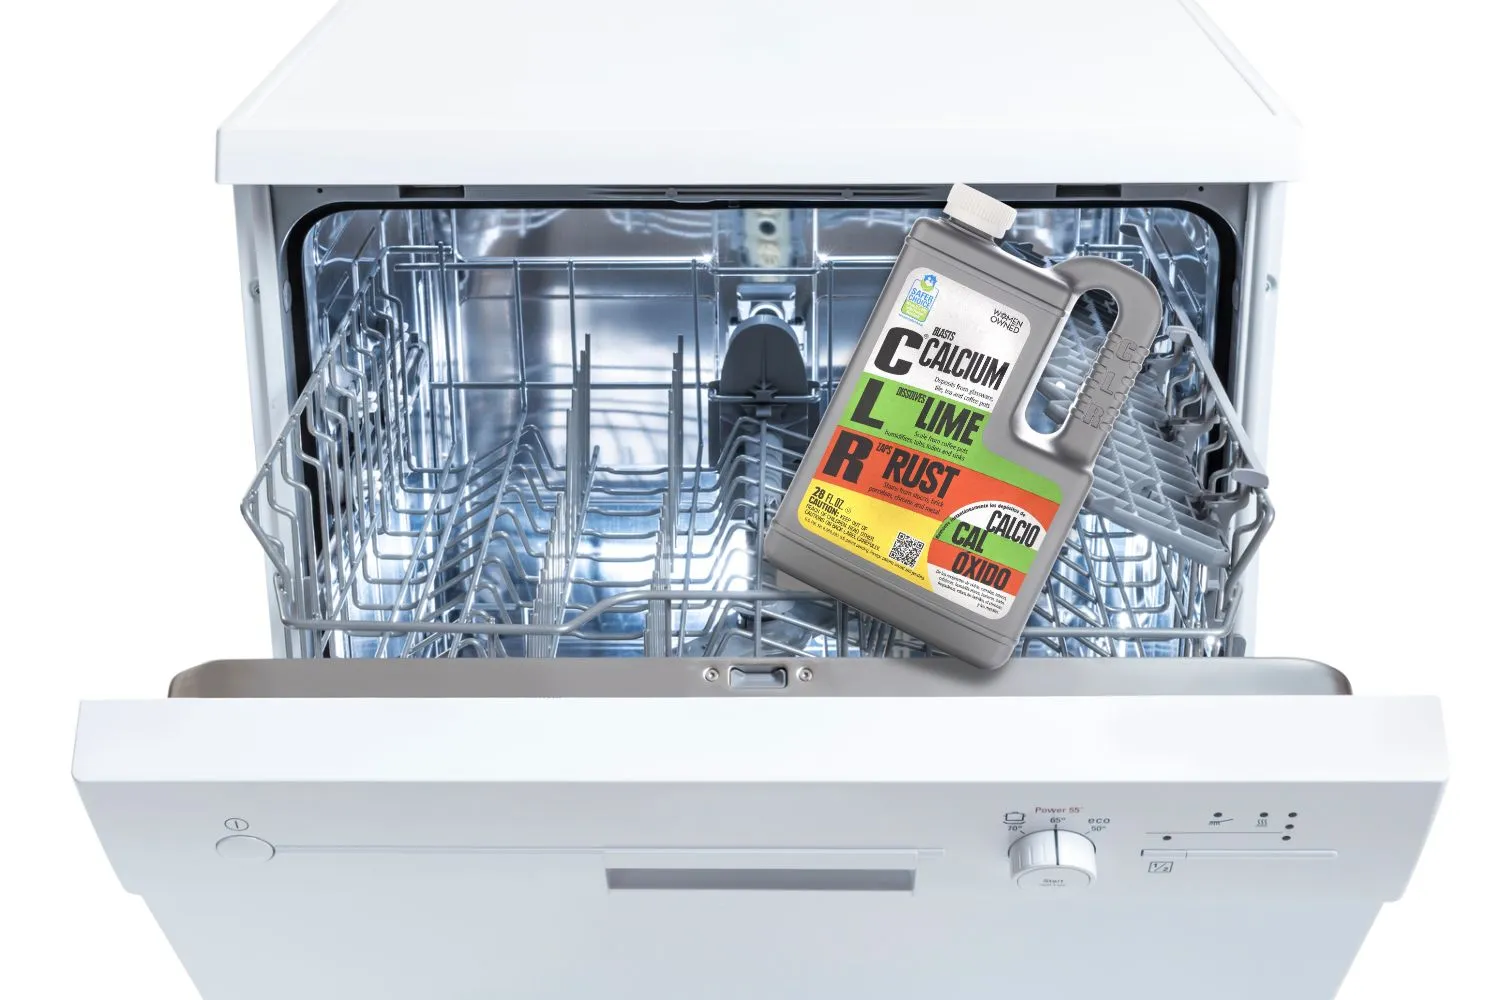 How to Clean a Dishwasher with CLR: A Step-by-Step Guide